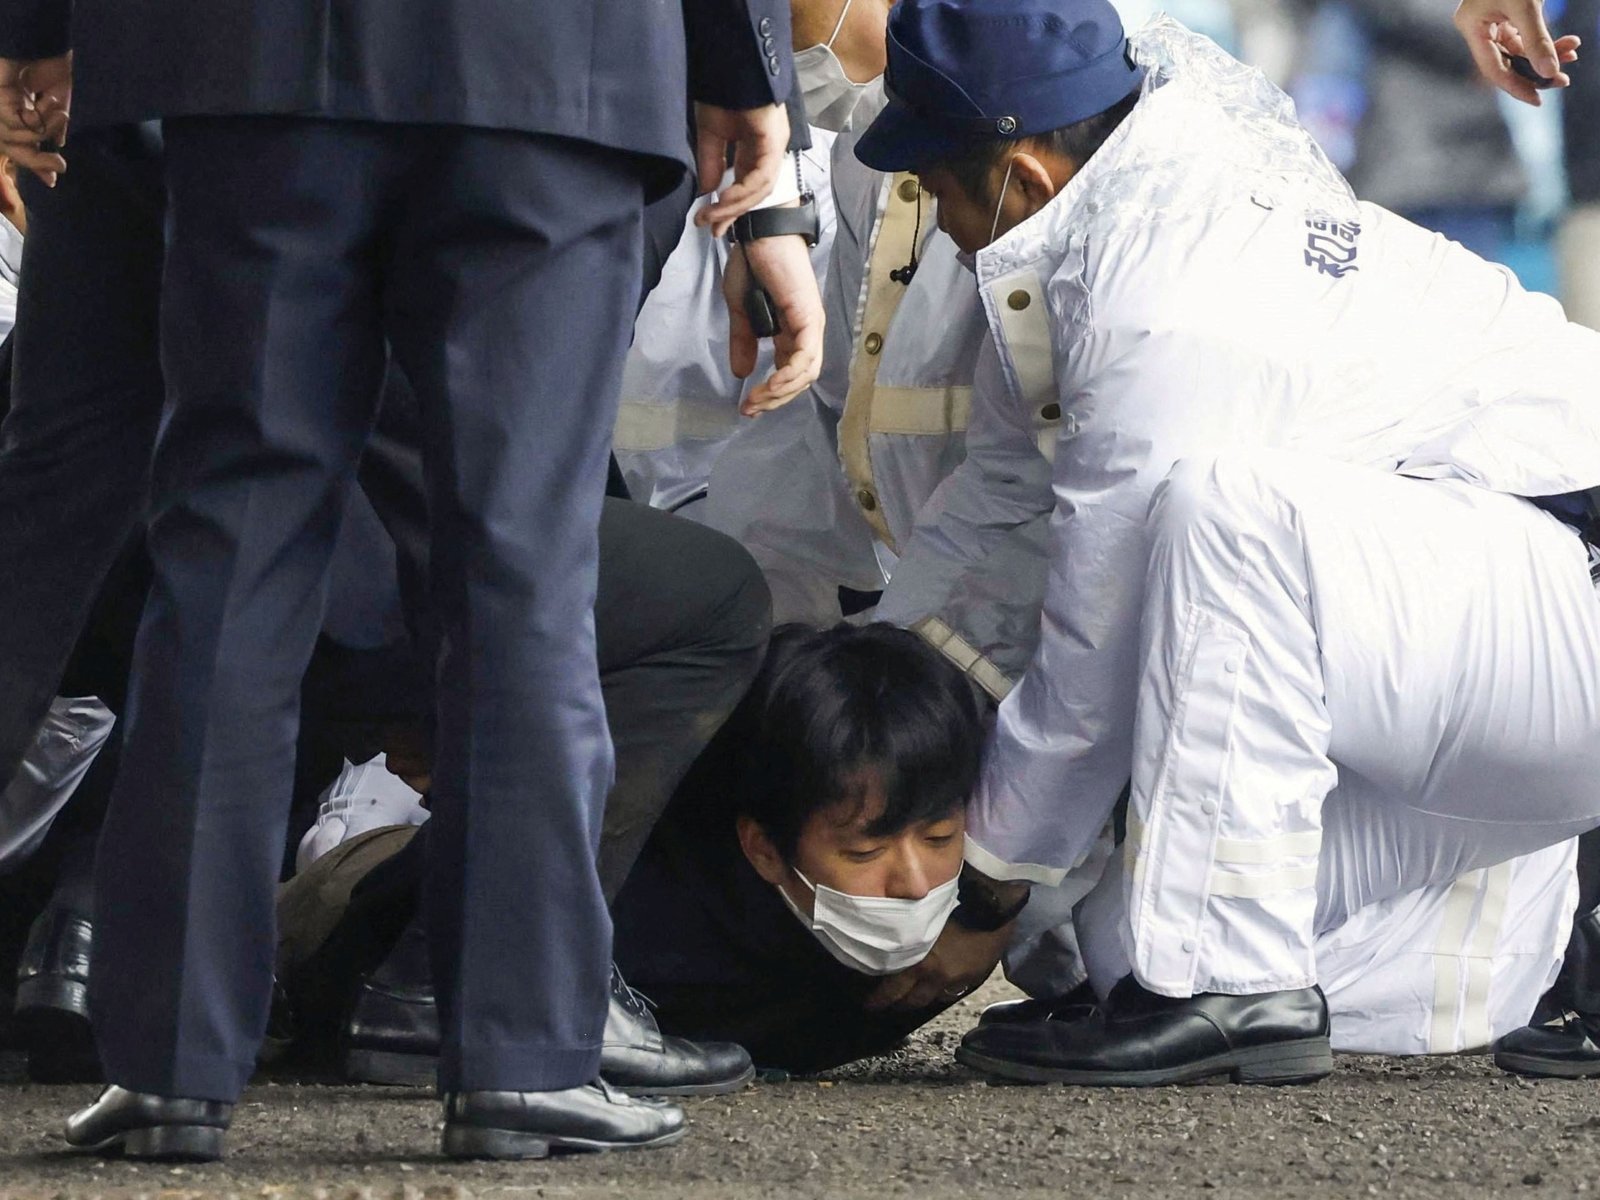 japan-pm-unharmed-after-‘smoke-bomb’-at-campaign-event